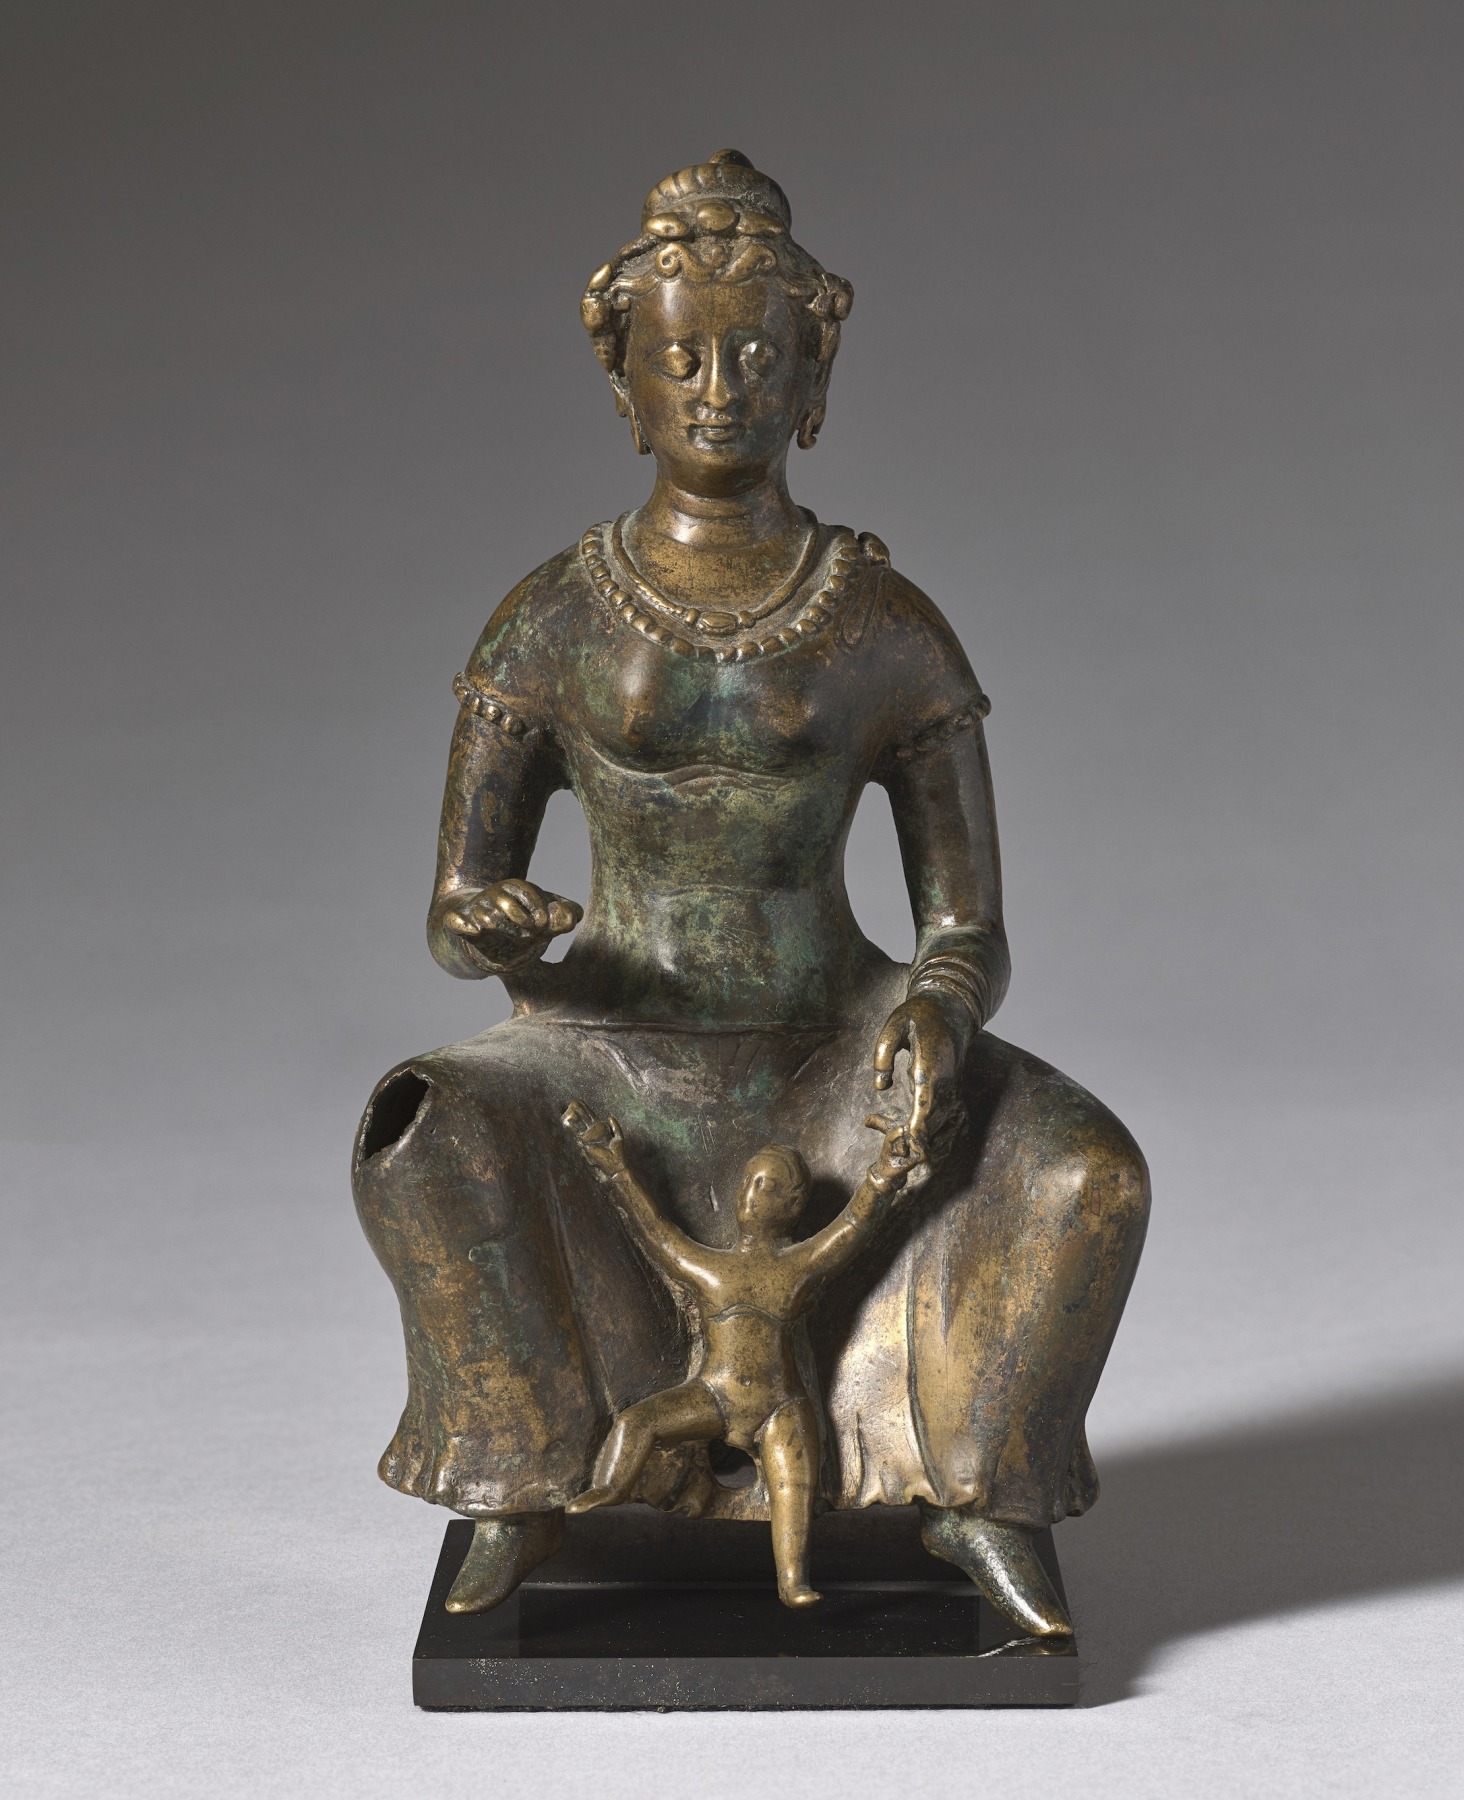 Larger version of the Same image of a Small bronze sculpture of a seated mother with her child playing between her legs